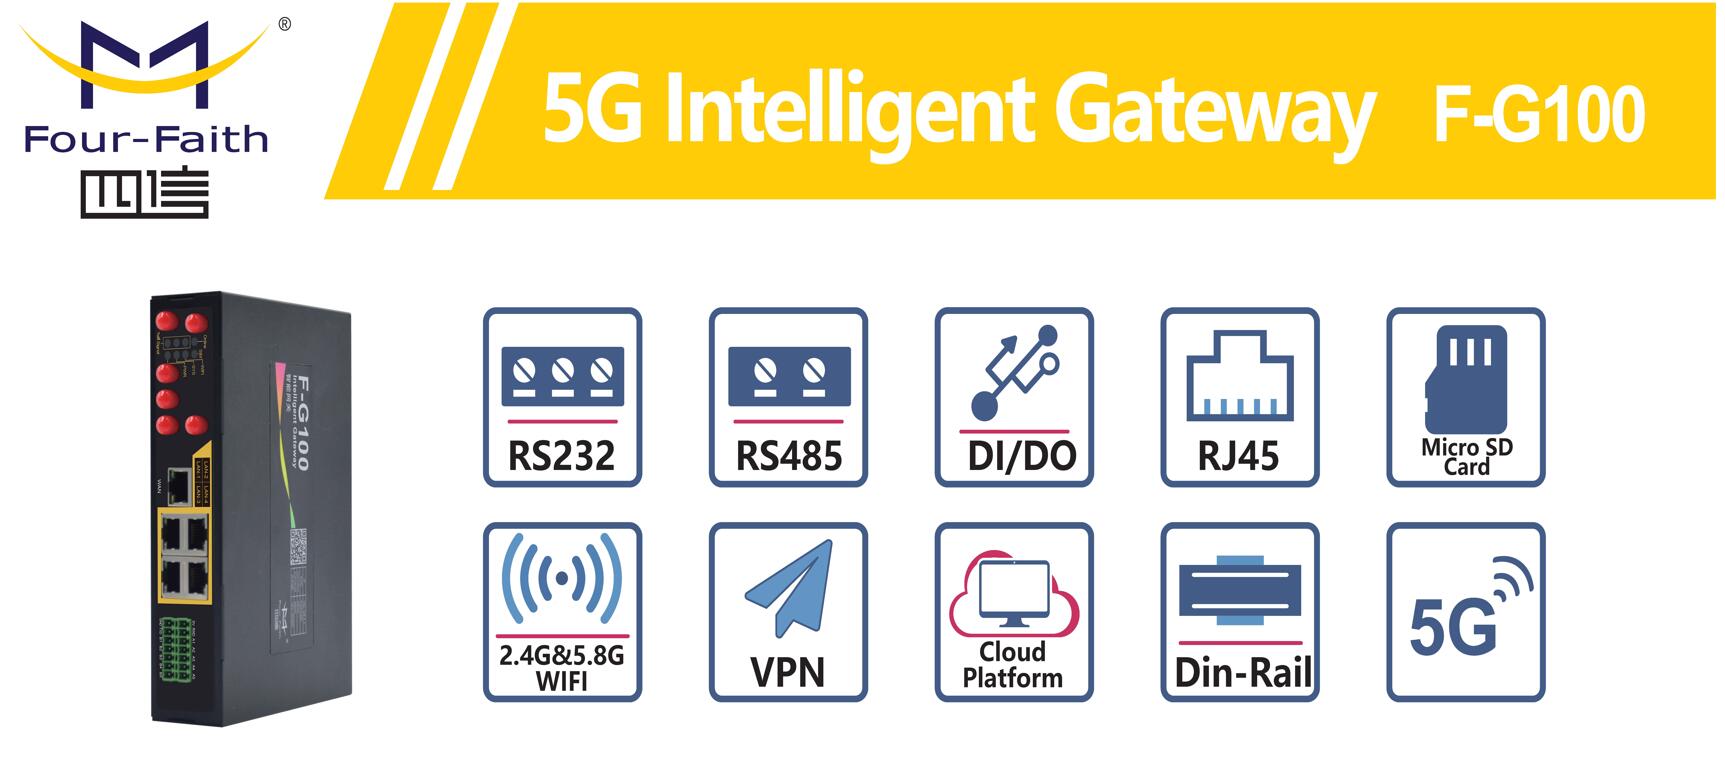 Advantages of 5G Network Technology